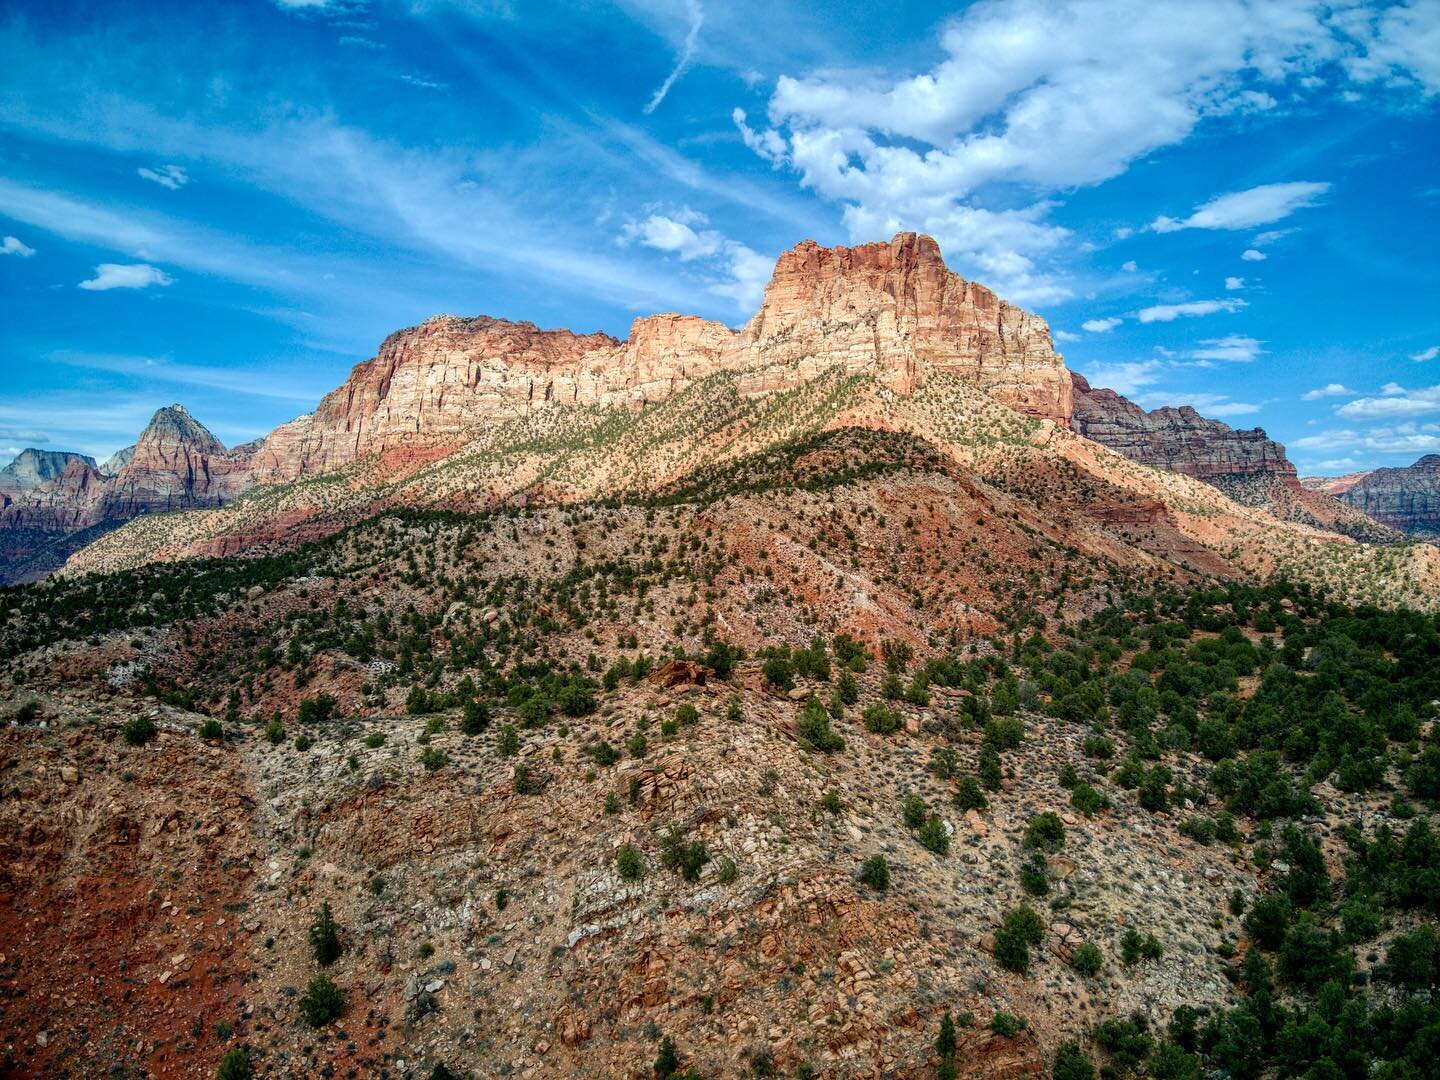 The geology of the Zion National Park 🏞 and Kolob canyons area includes nine formations that together represent 150 million years of mostly Mesozoic-aged sedimentation. At various periods in that time warm, shallow seas, streams, ponds and lakes, va